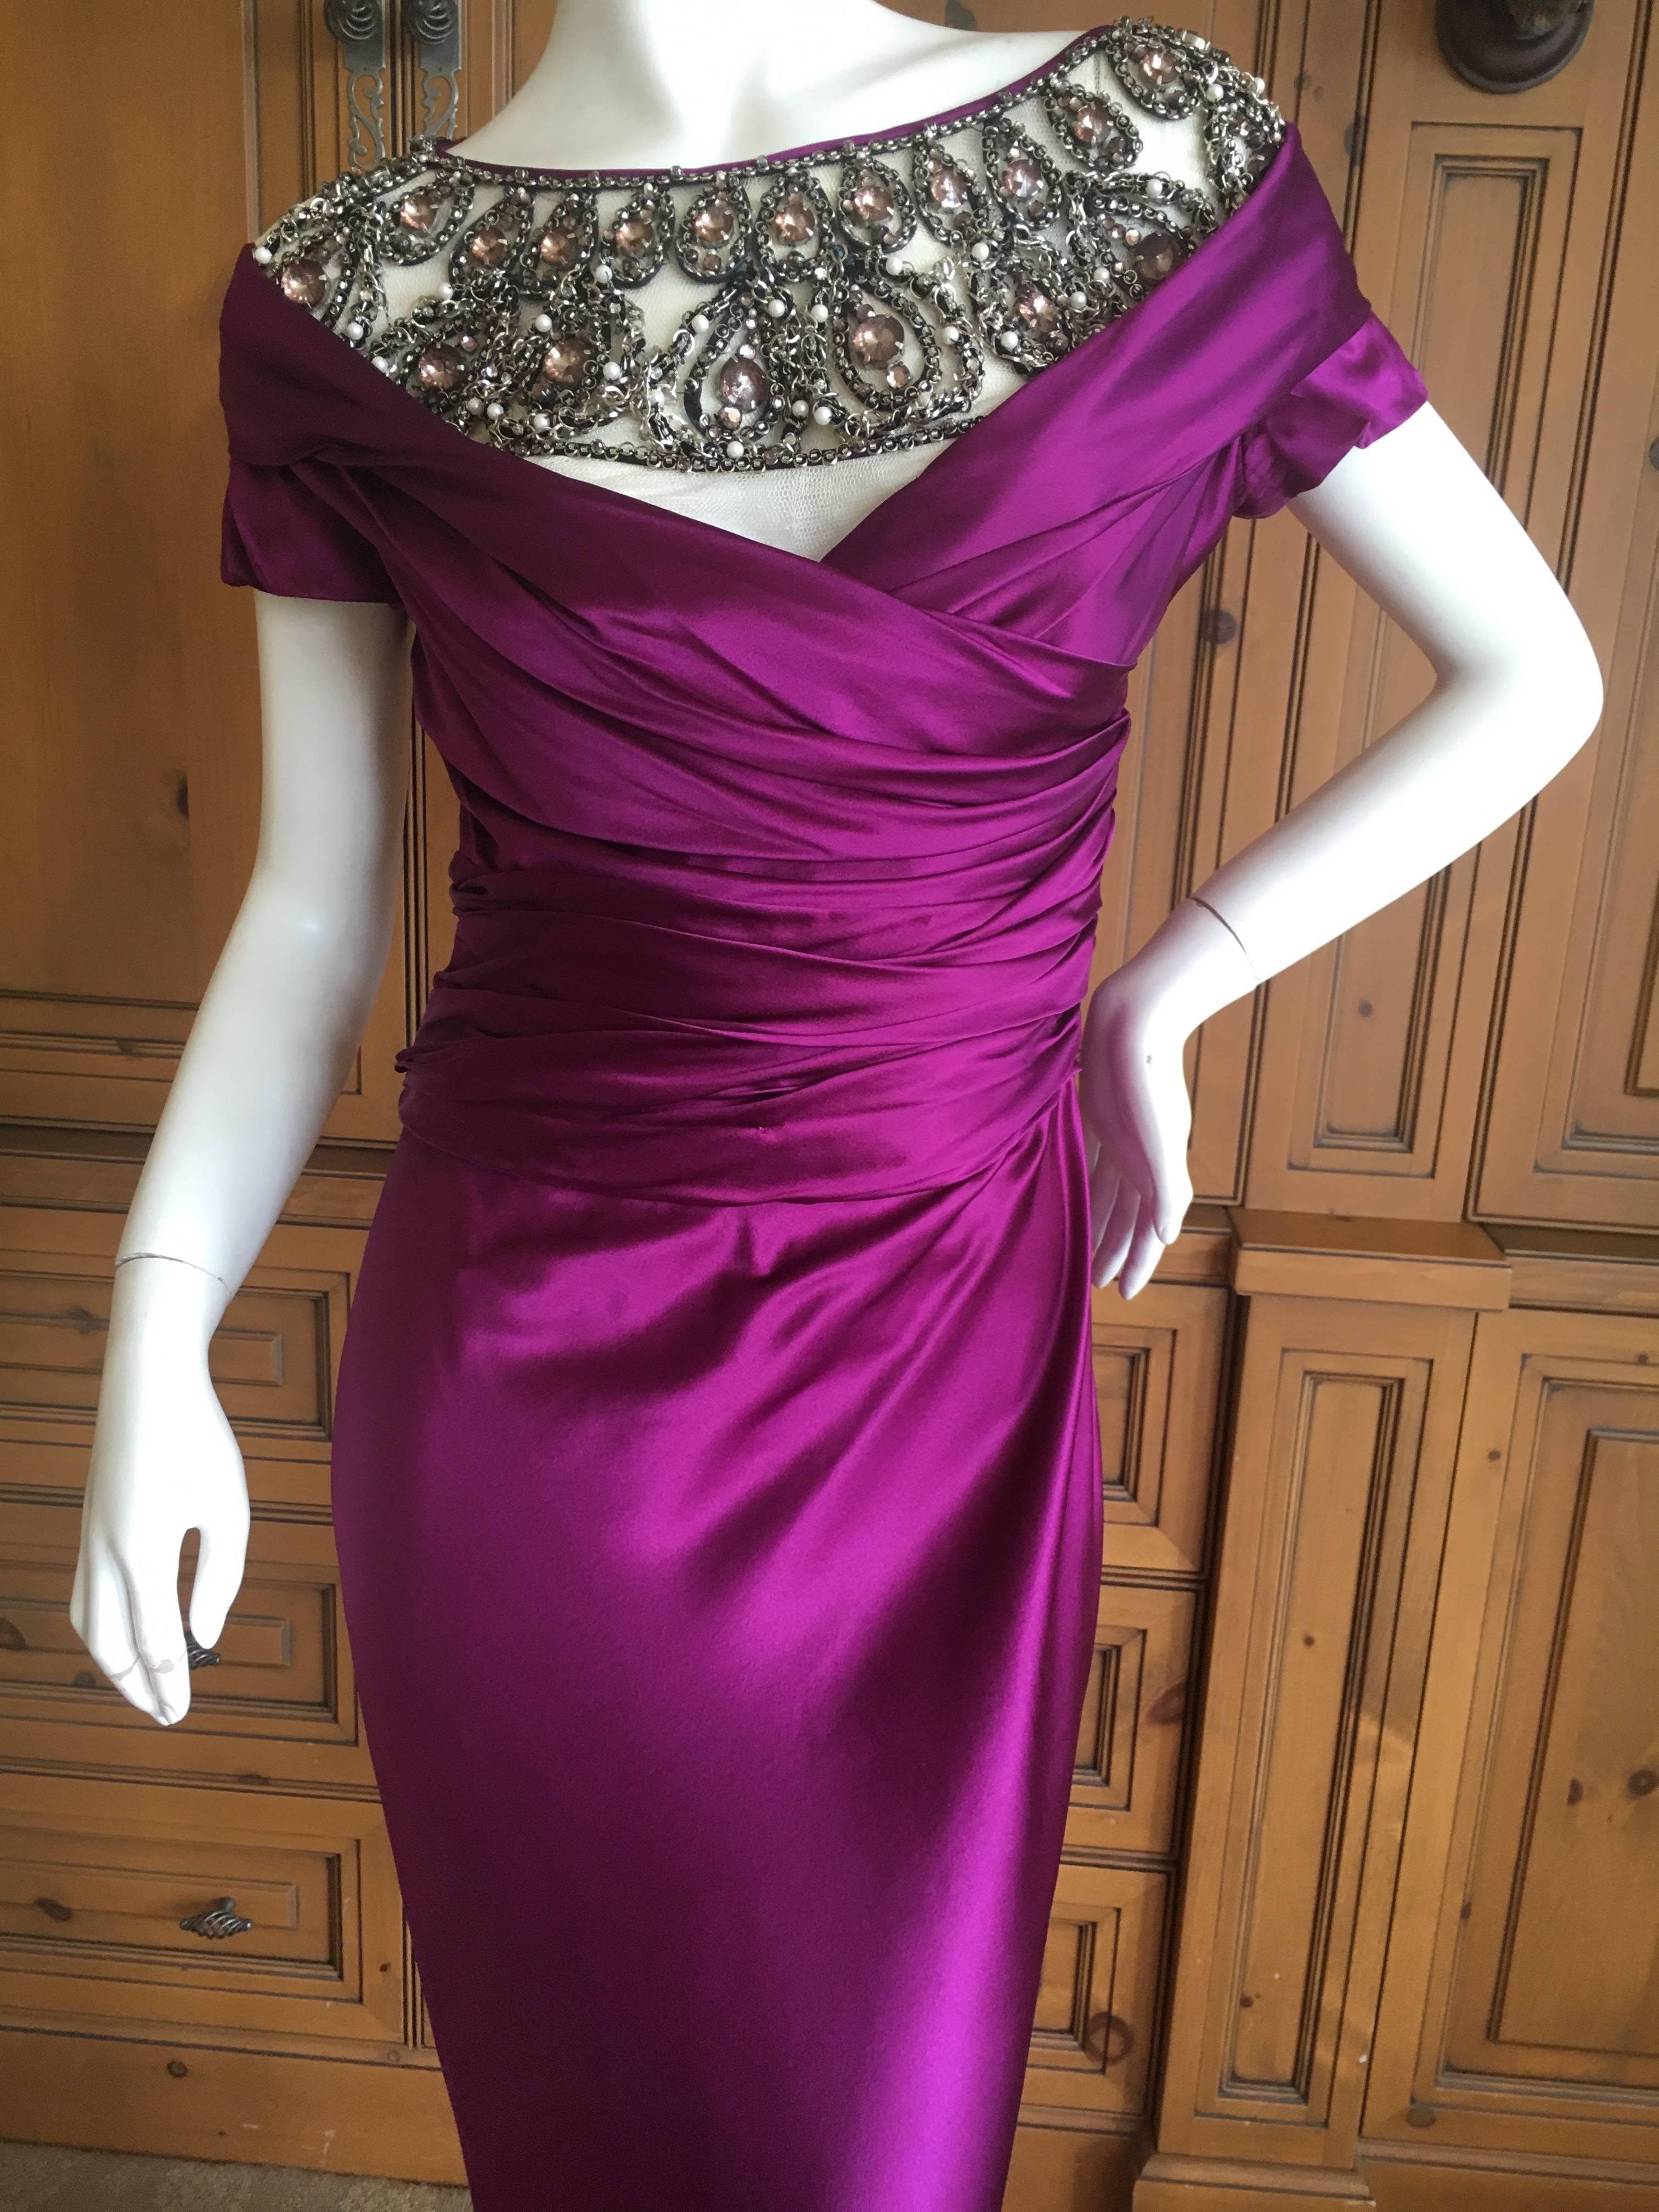 Wonderful purple evening dress with the most gobsmacking "jeweled" collar.
There is an inner corset.
Simply sublime
Size 36
Bust 38"
Waist 28"
Hips 42"
Length 53"
Execllent condition